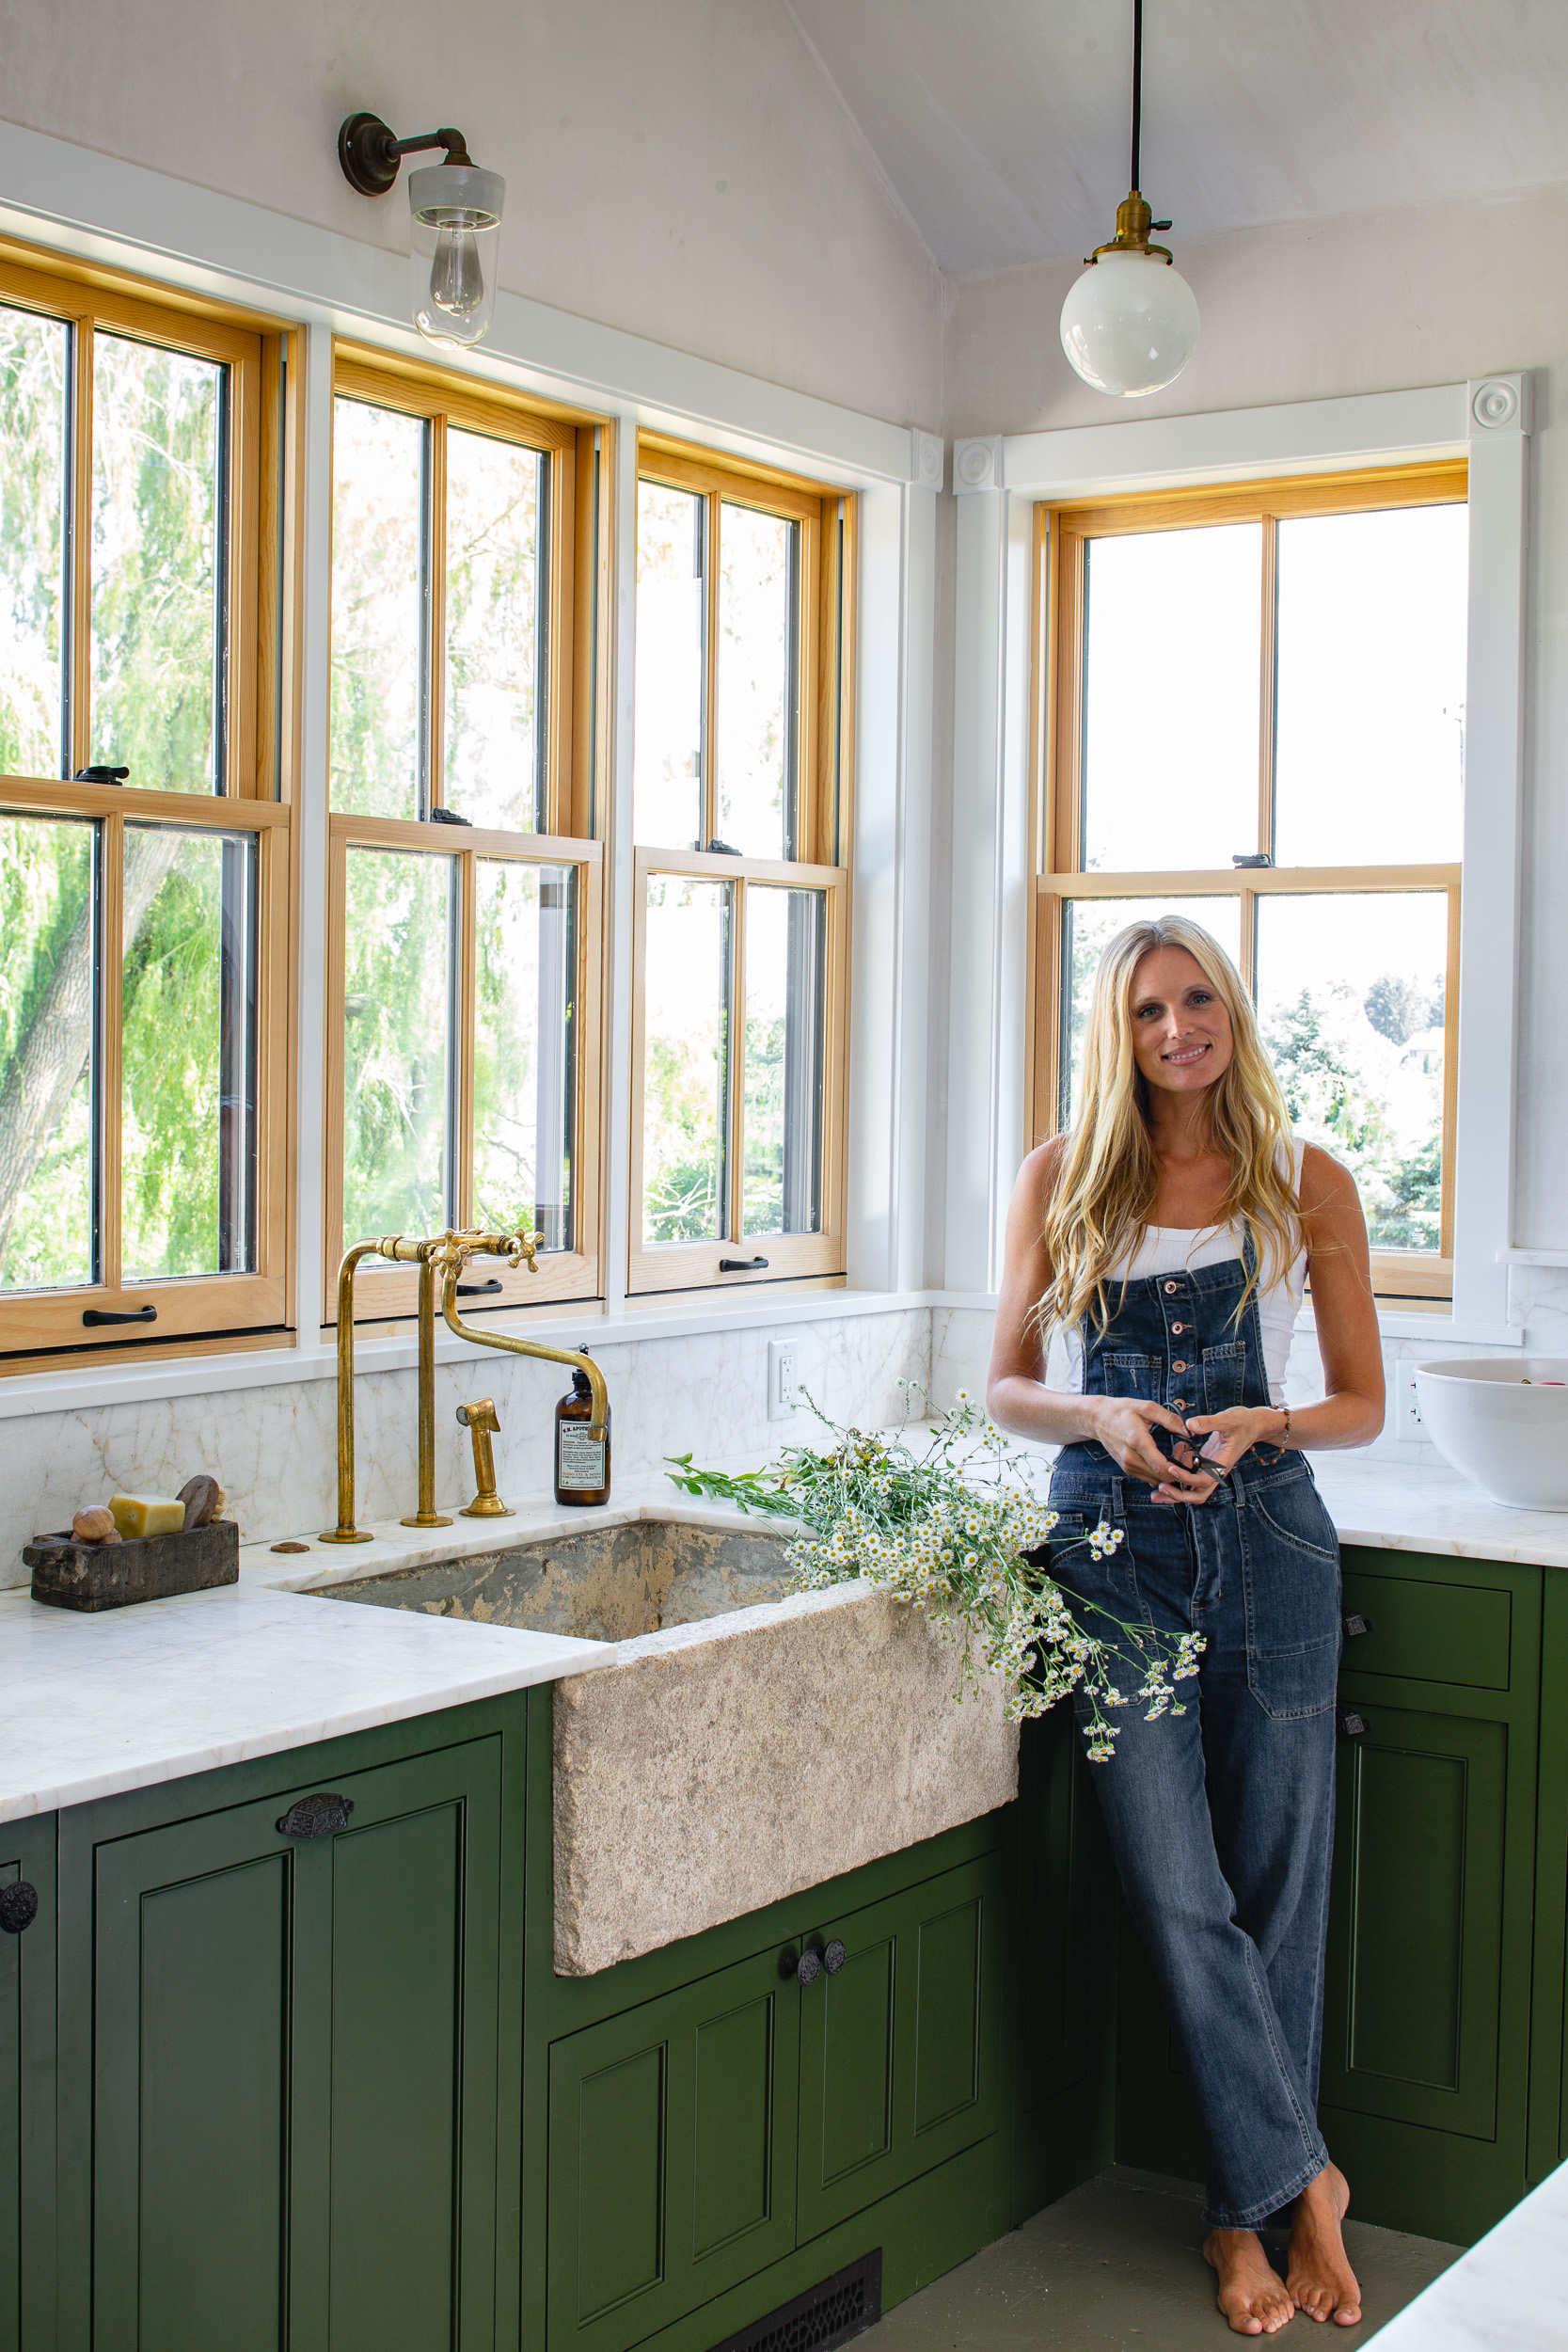 designer lauren liess standing in kitchen with green cabinets and unlacquered brass faucet